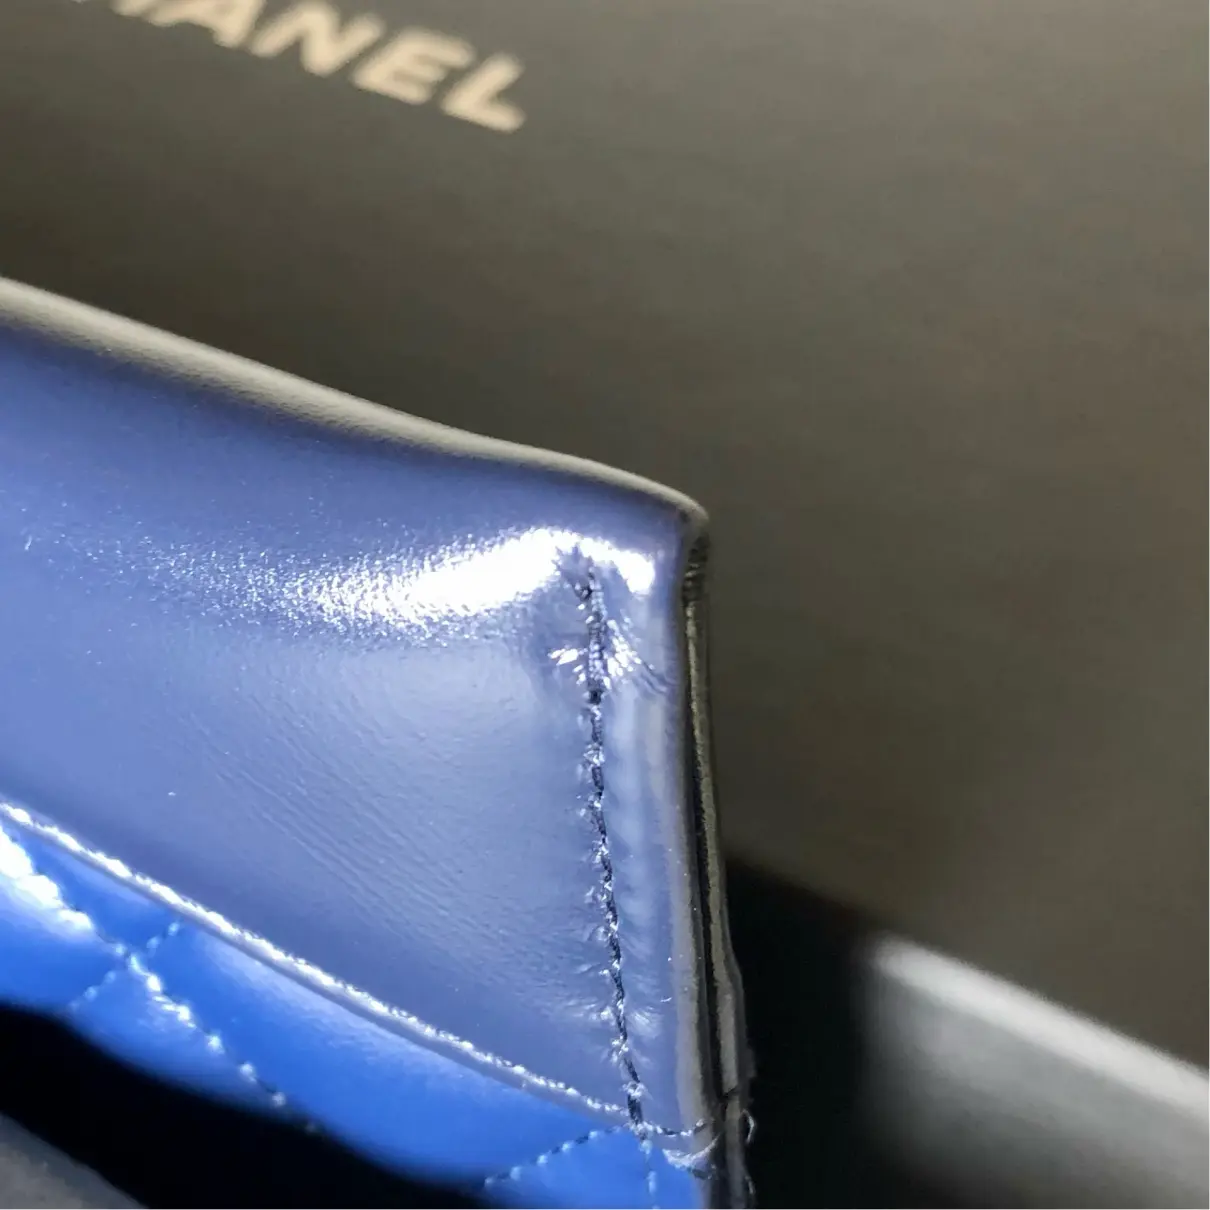 Gabrielle leather wallet Chanel